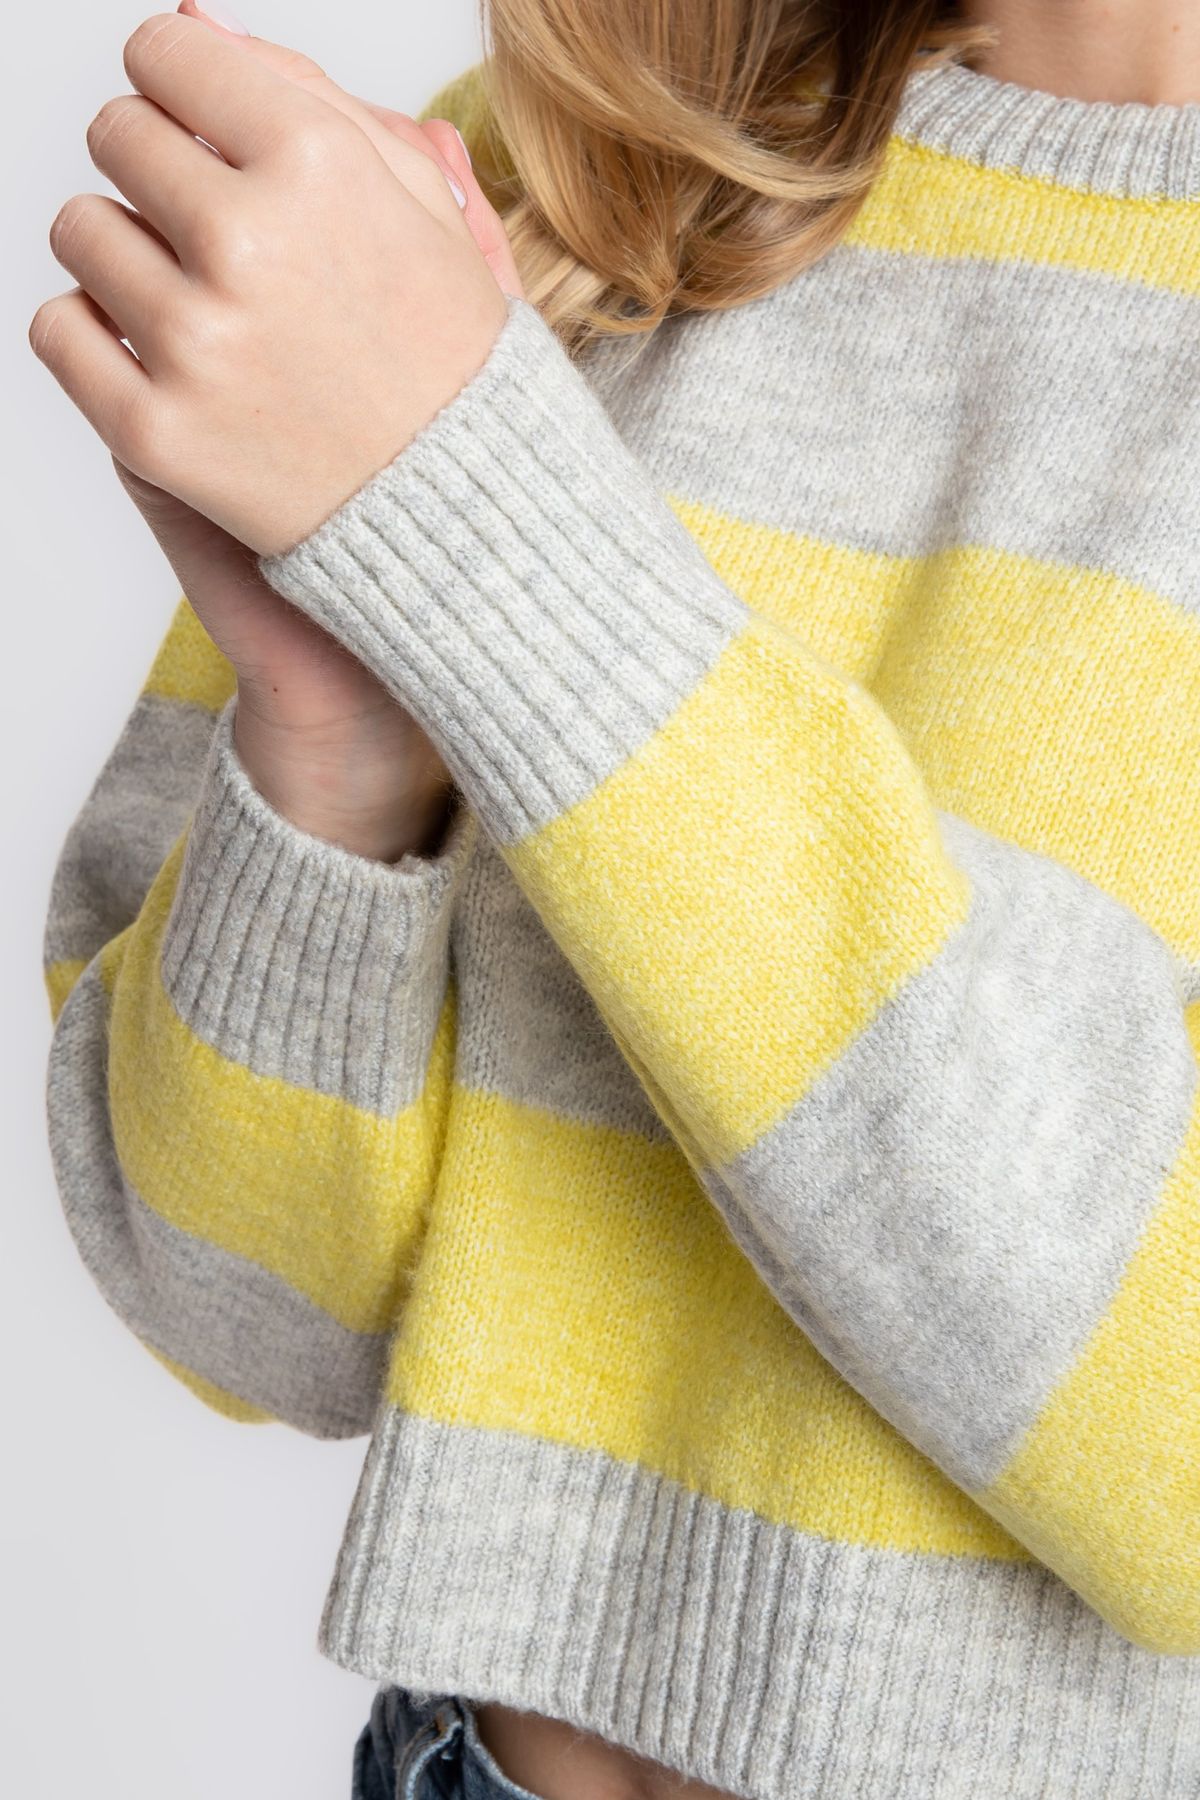 Striped Crew Neck Cropped Sweater